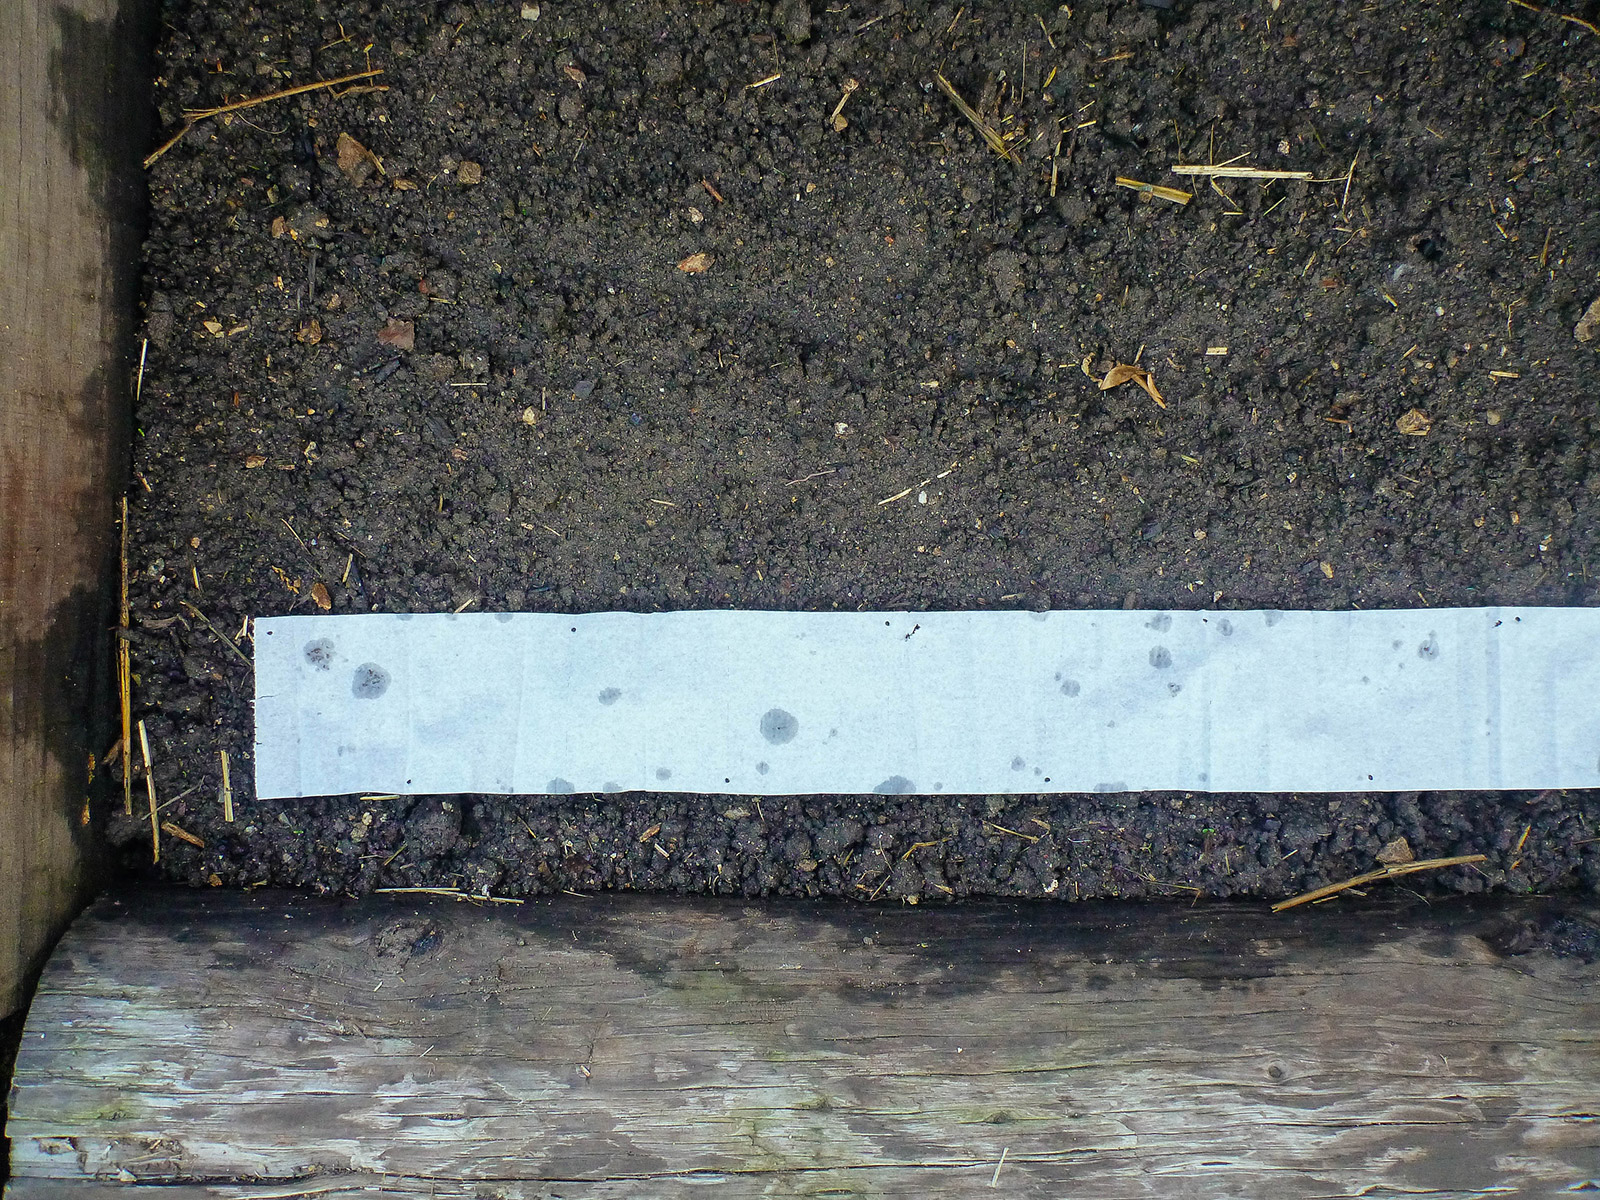 A strip of seed tape rolled out and planted in a garden bed